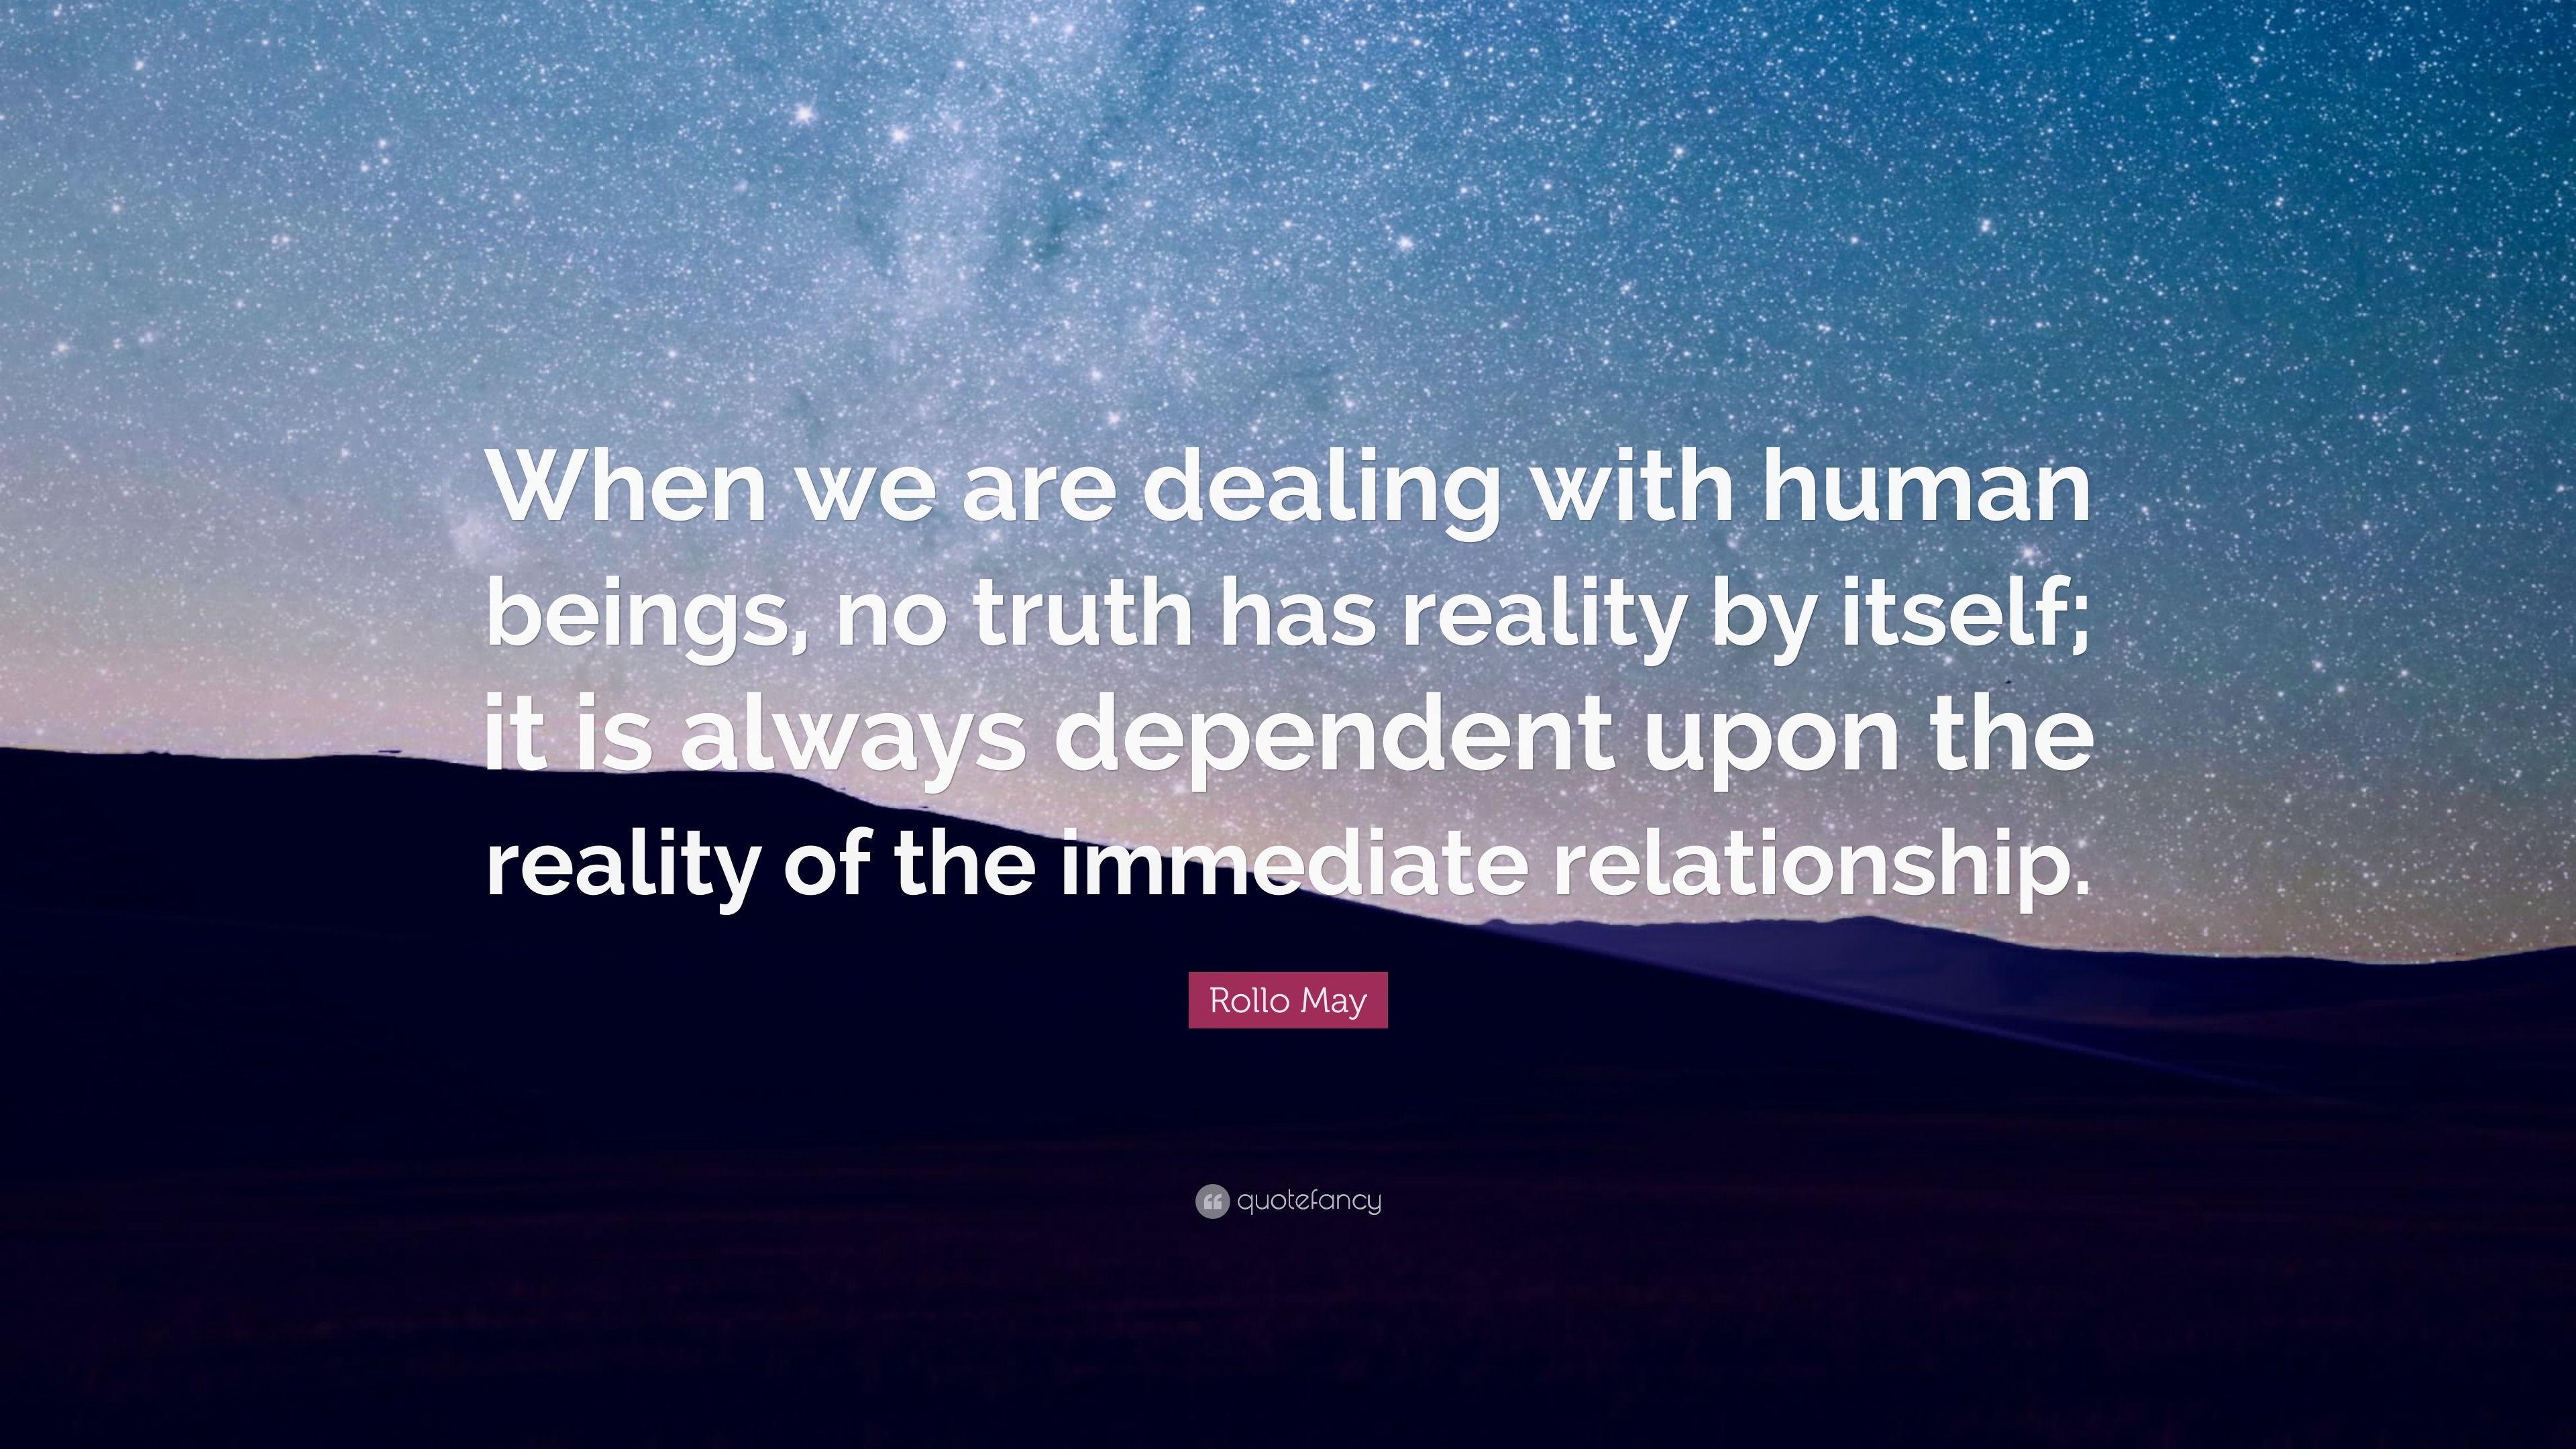 Rollo May Quote: “When we are dealing with human beings, no truth has ...